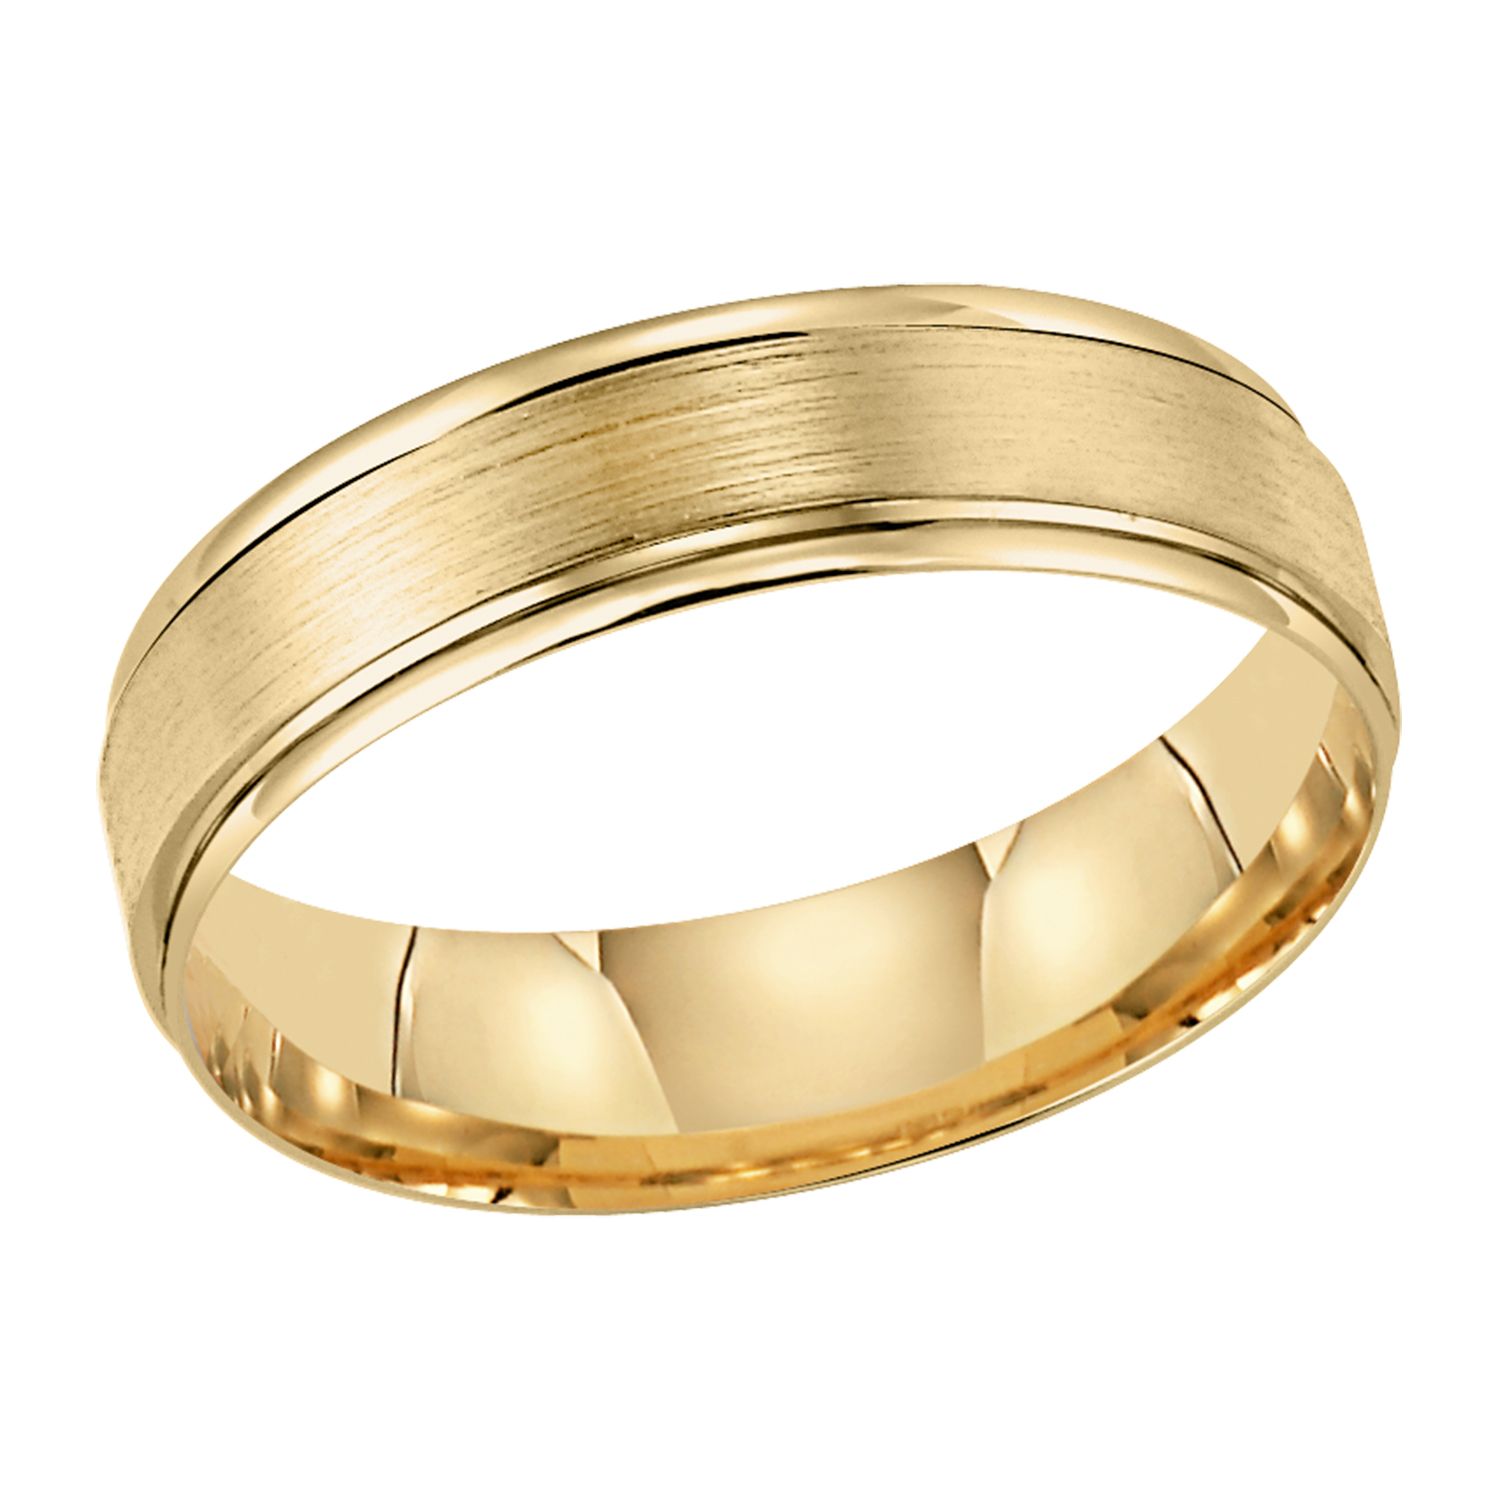 Orange Blossom Satin Engraved Ladies 10Kt Yellow Gold Wed Band